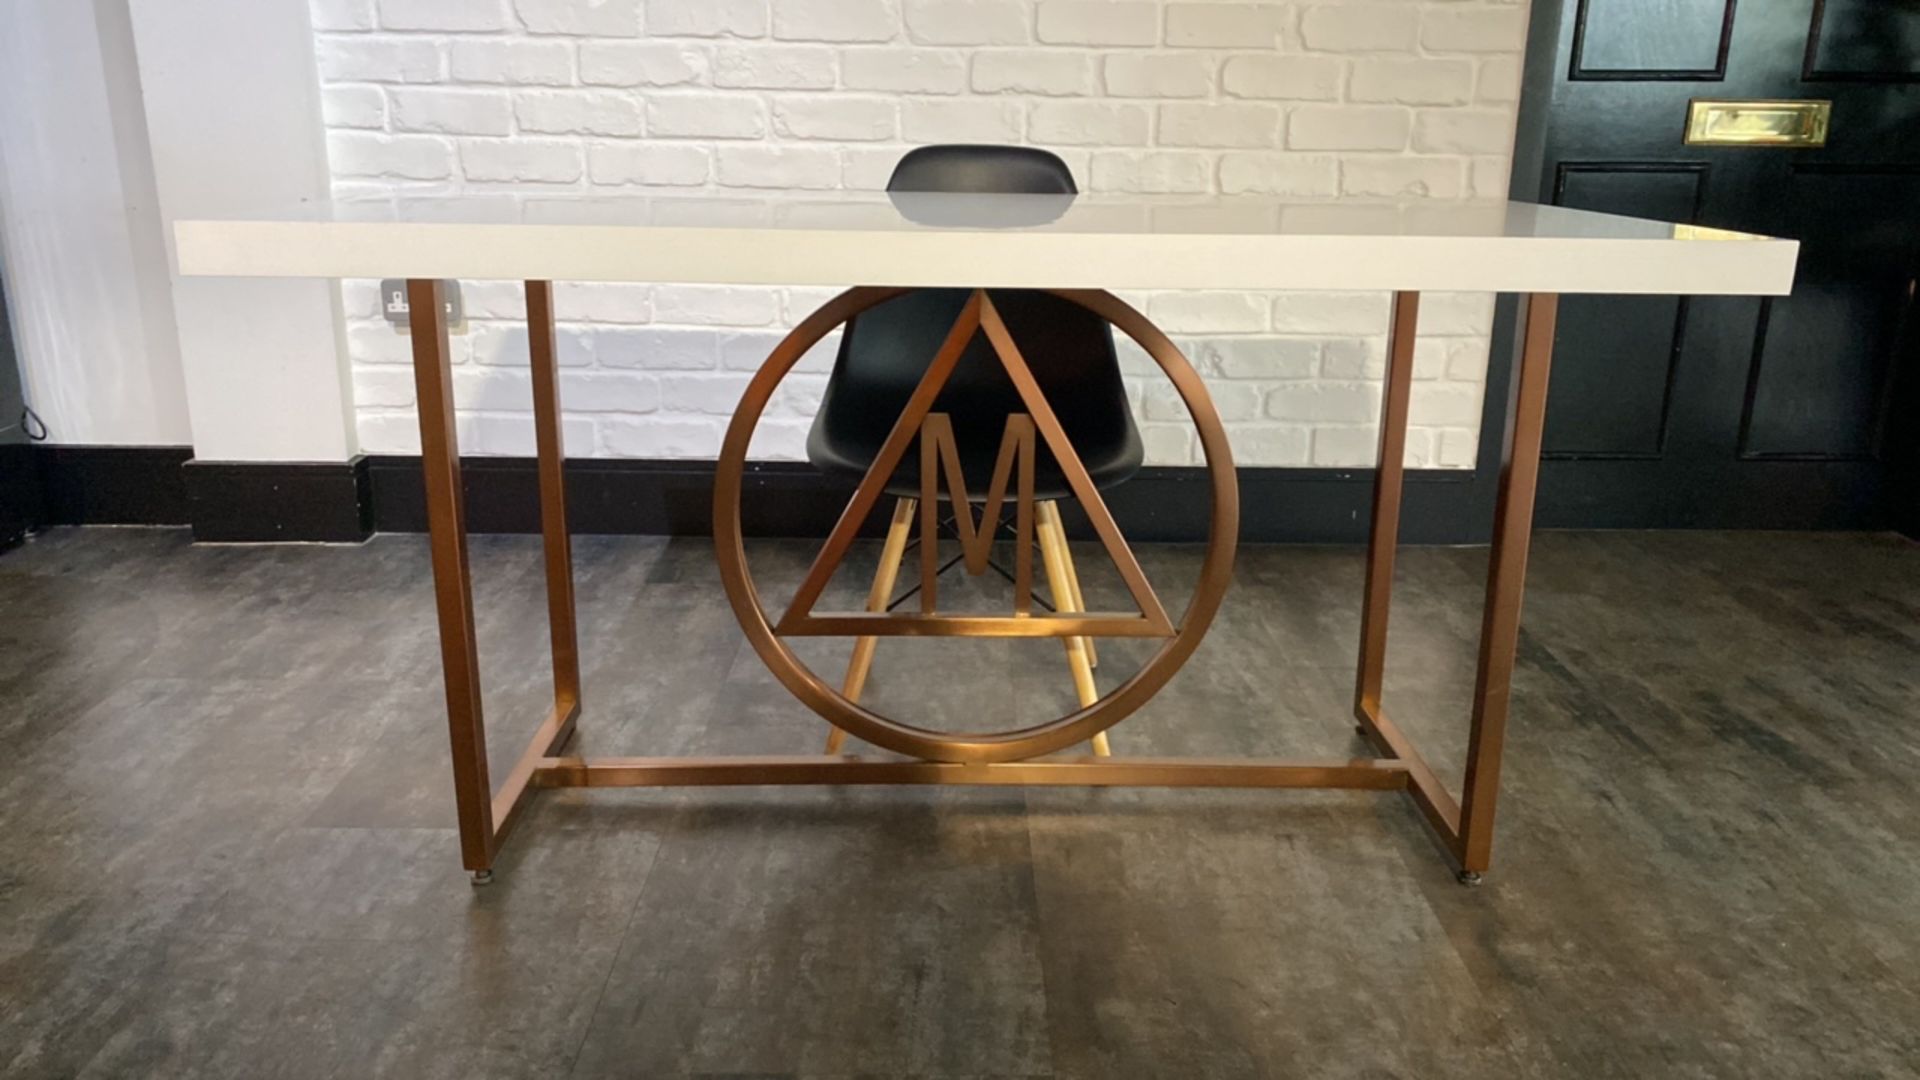 Missguided Logo Table with Chair